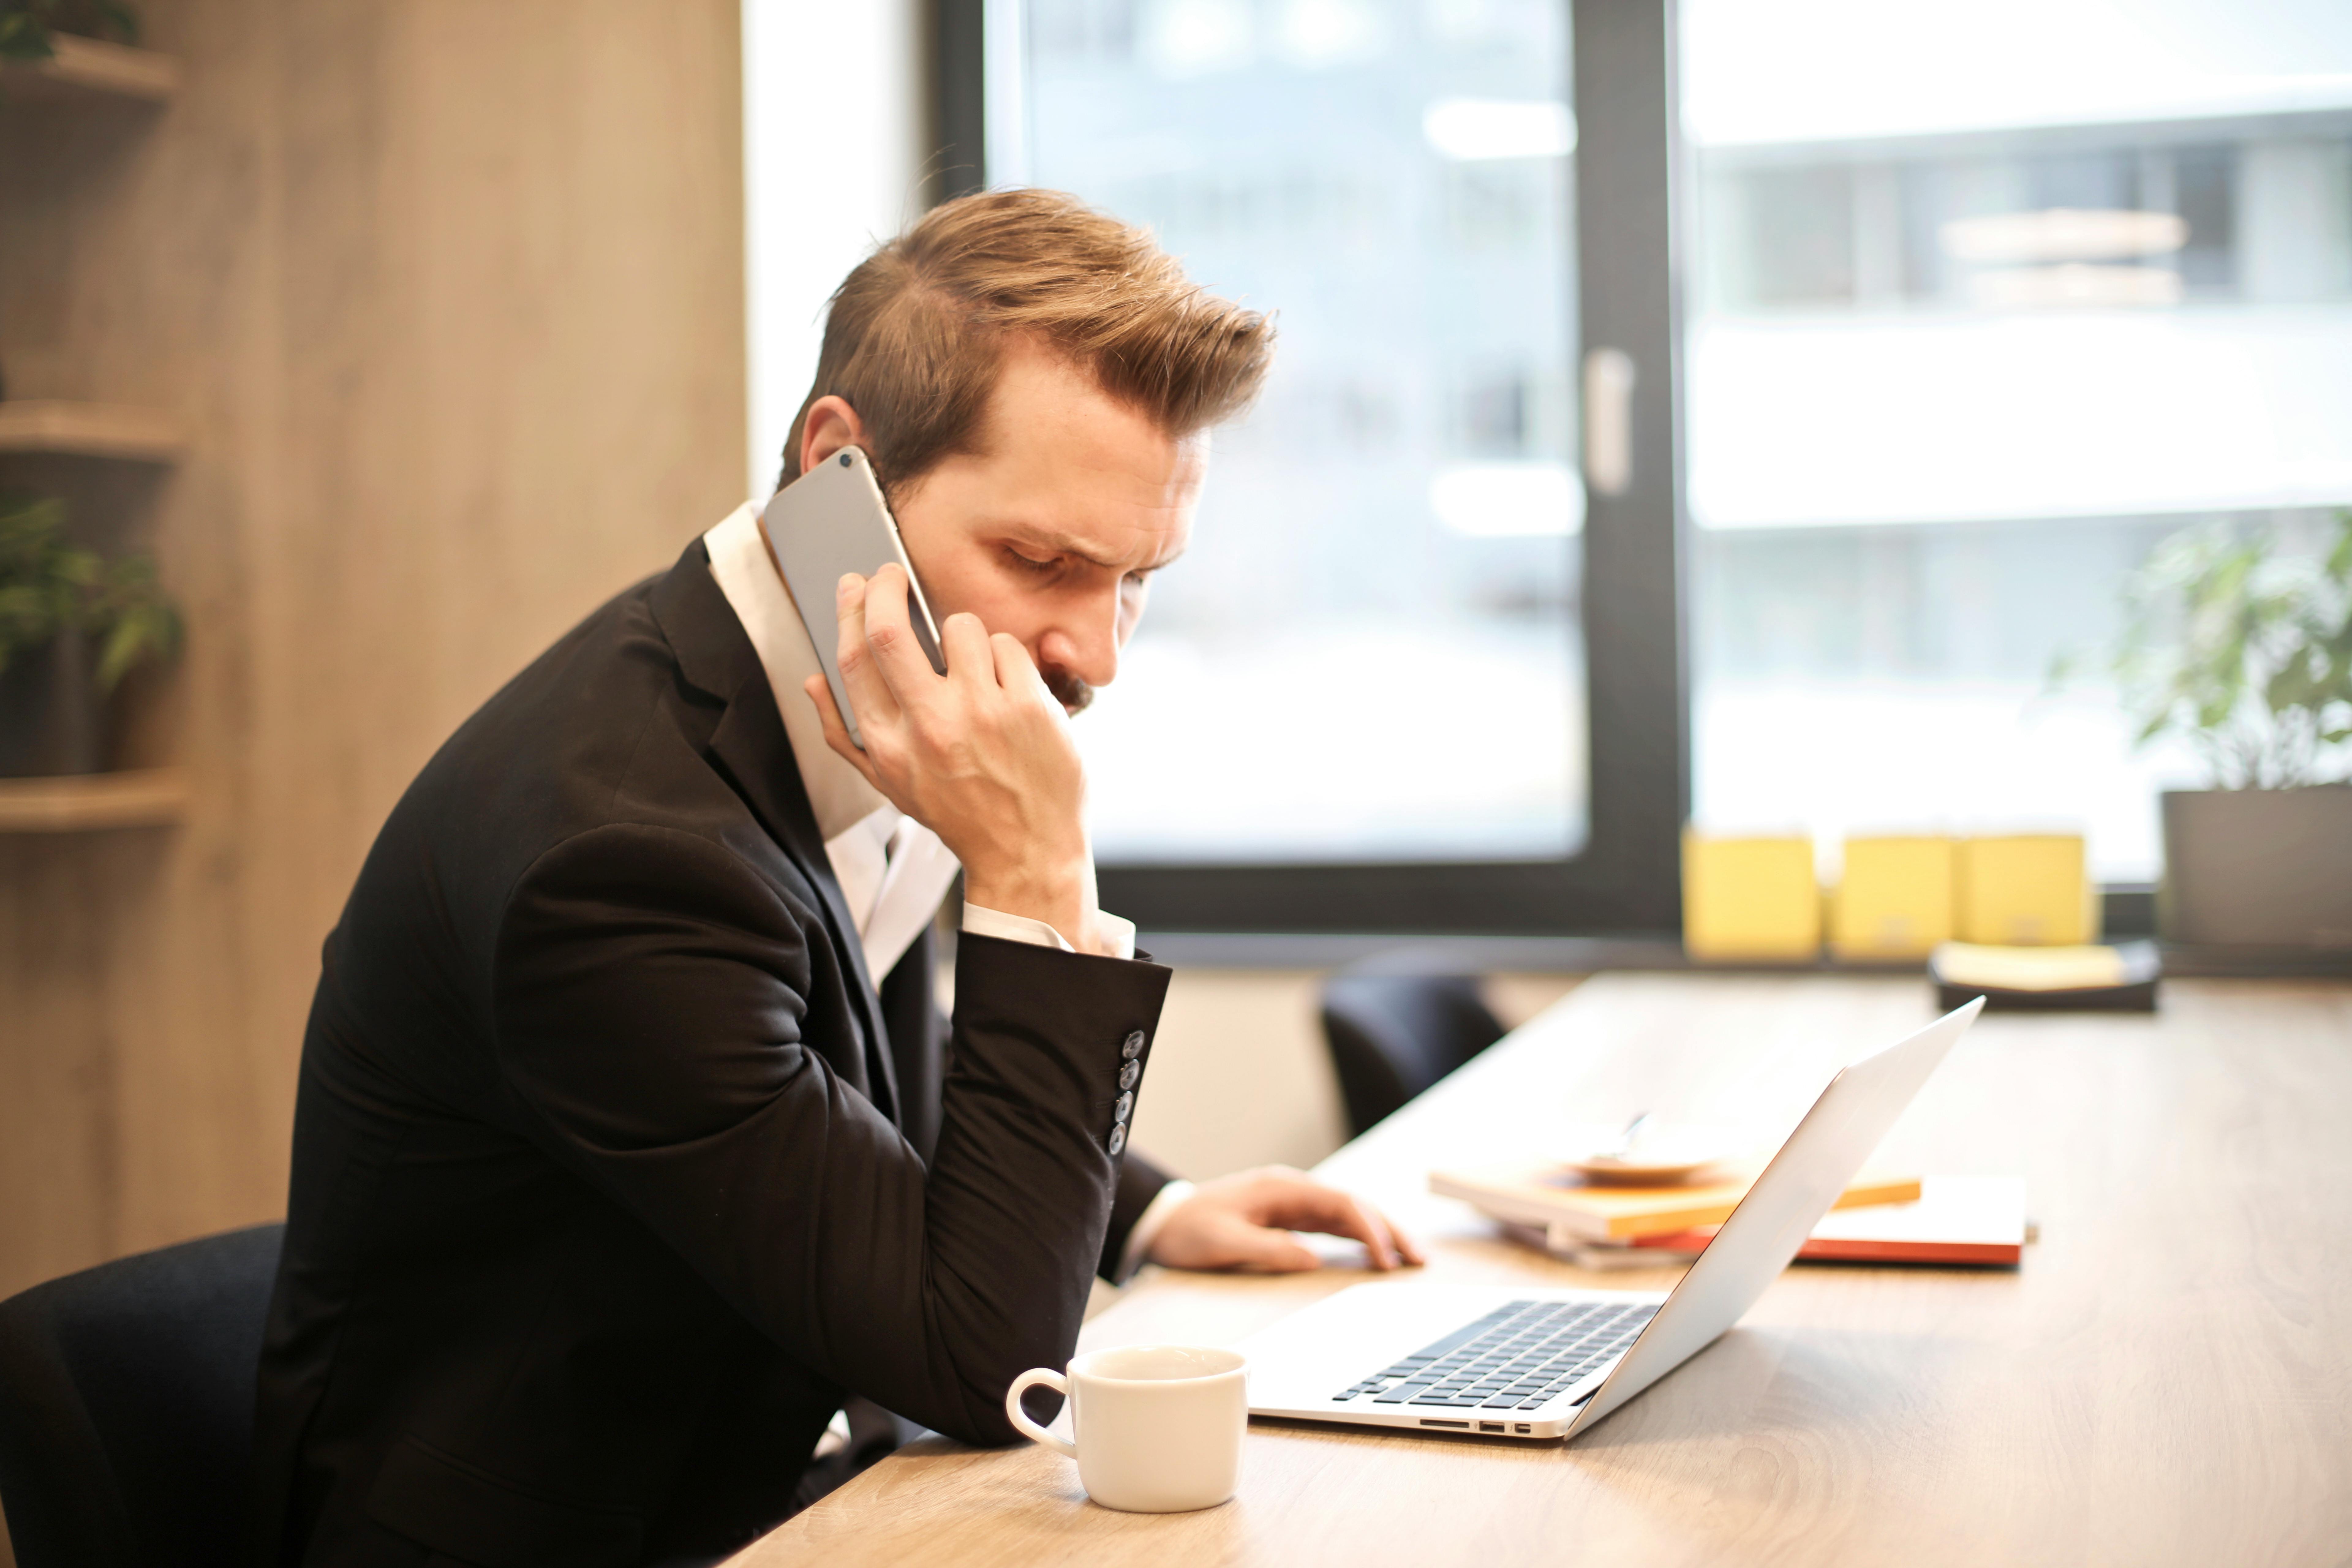 An angry man on call | Source: Pexels